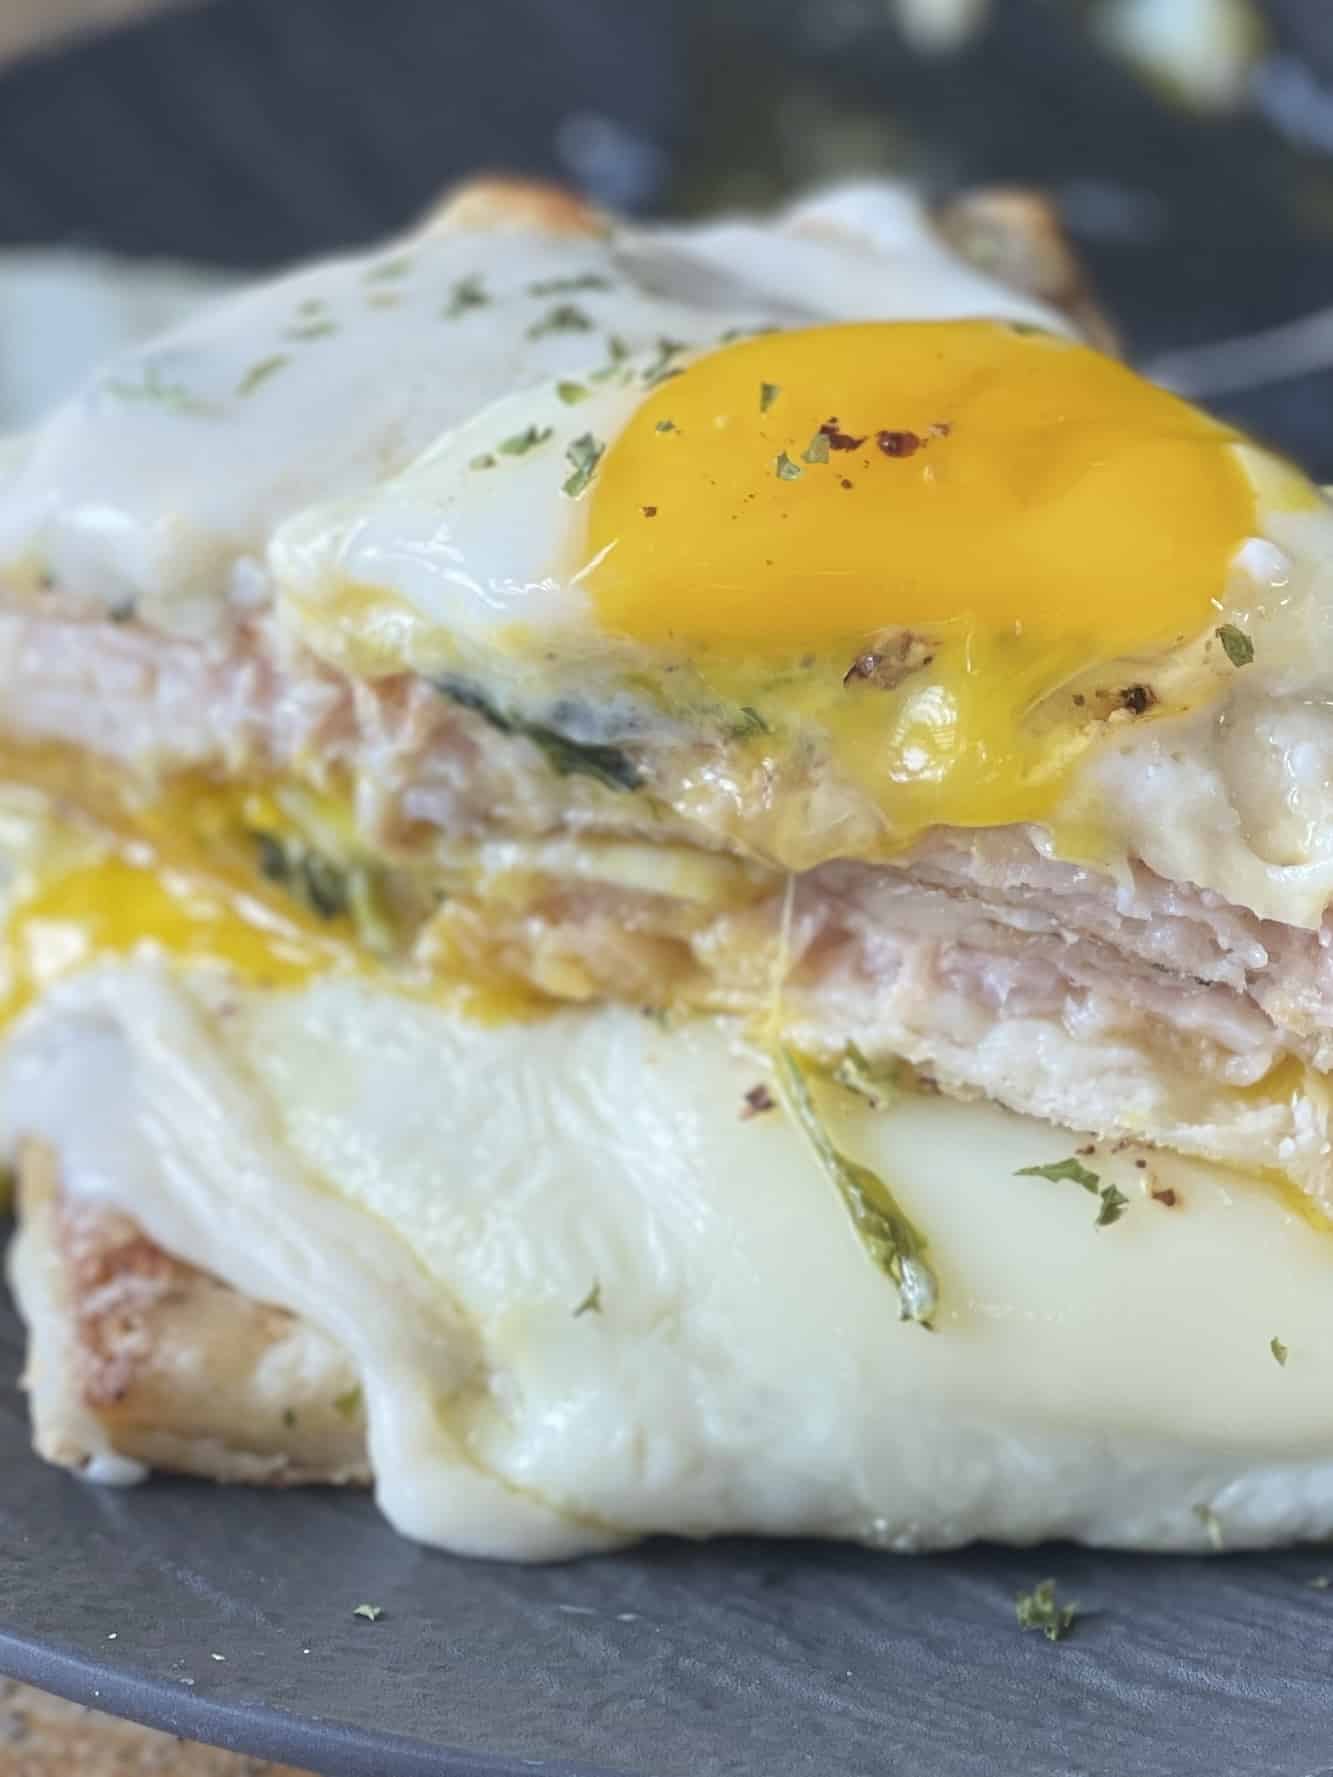 Enjoy A Taste Of Paris With This Twist On The Croque Madame